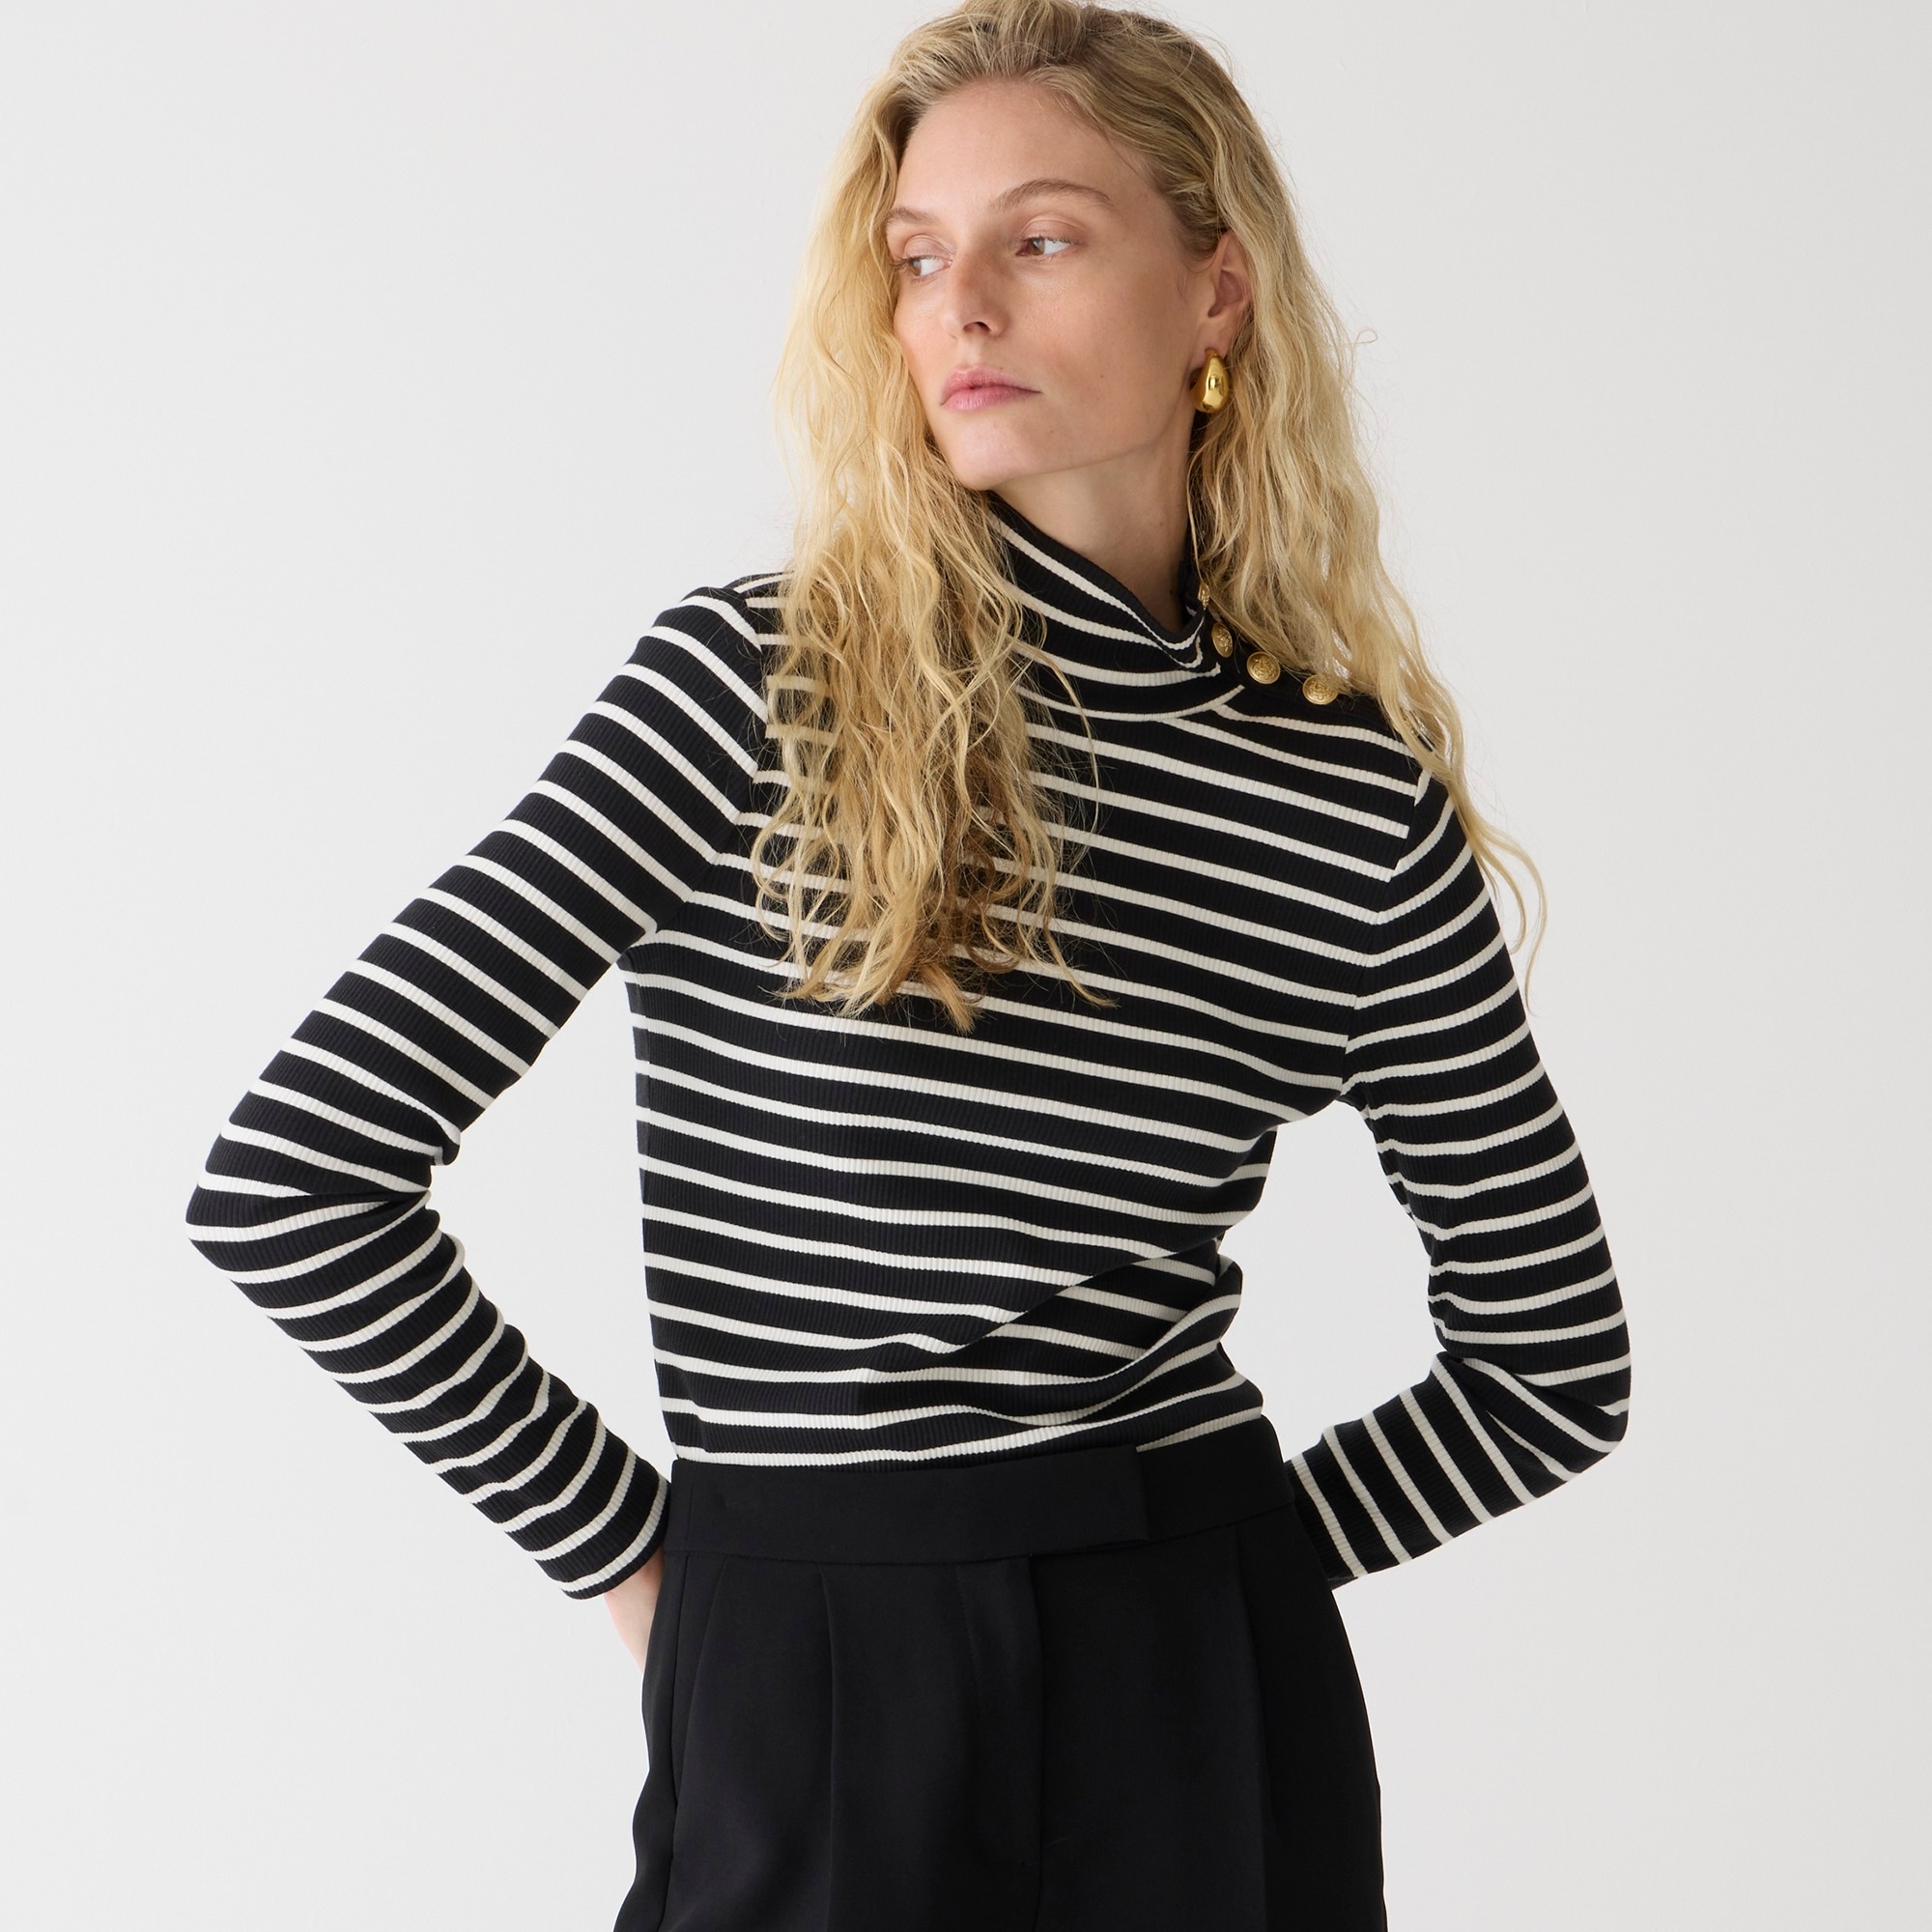 J.Crew: Vintage Rib Turtleneck With Buttons In Stripe For Women